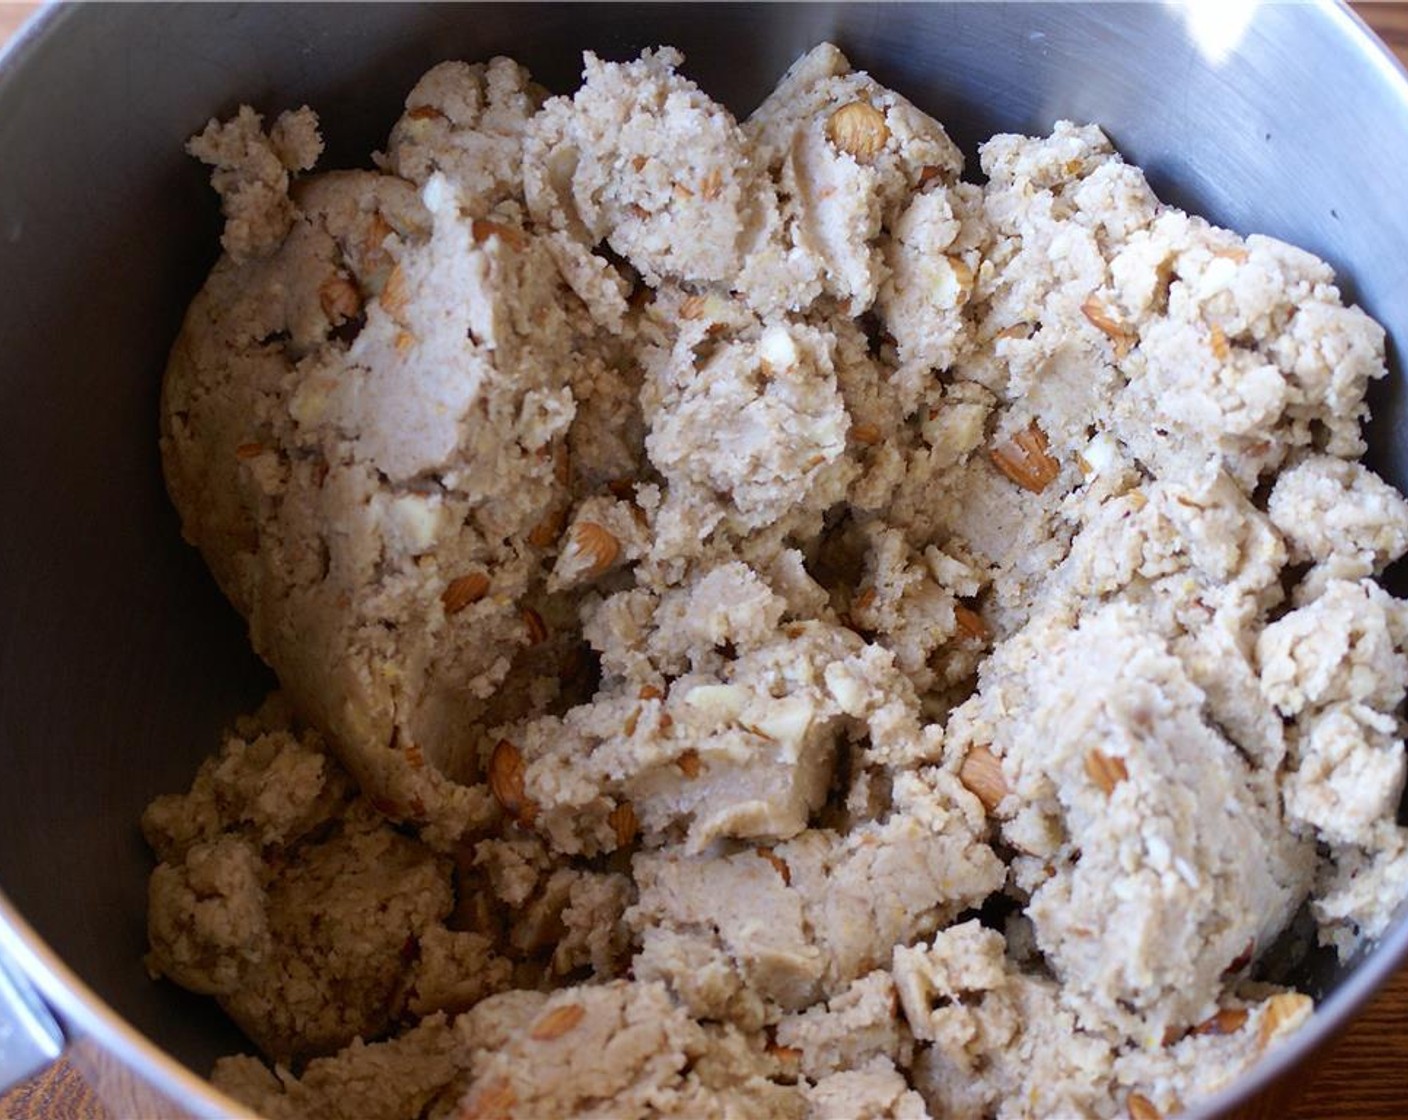 step 5 In a separate bowl, whisk together All-Purpose Flour (1 1/2 cups), Whole Wheat Flour (1 cup), Baking Powder (1/2 Tbsp), and Salt (1/4 tsp).